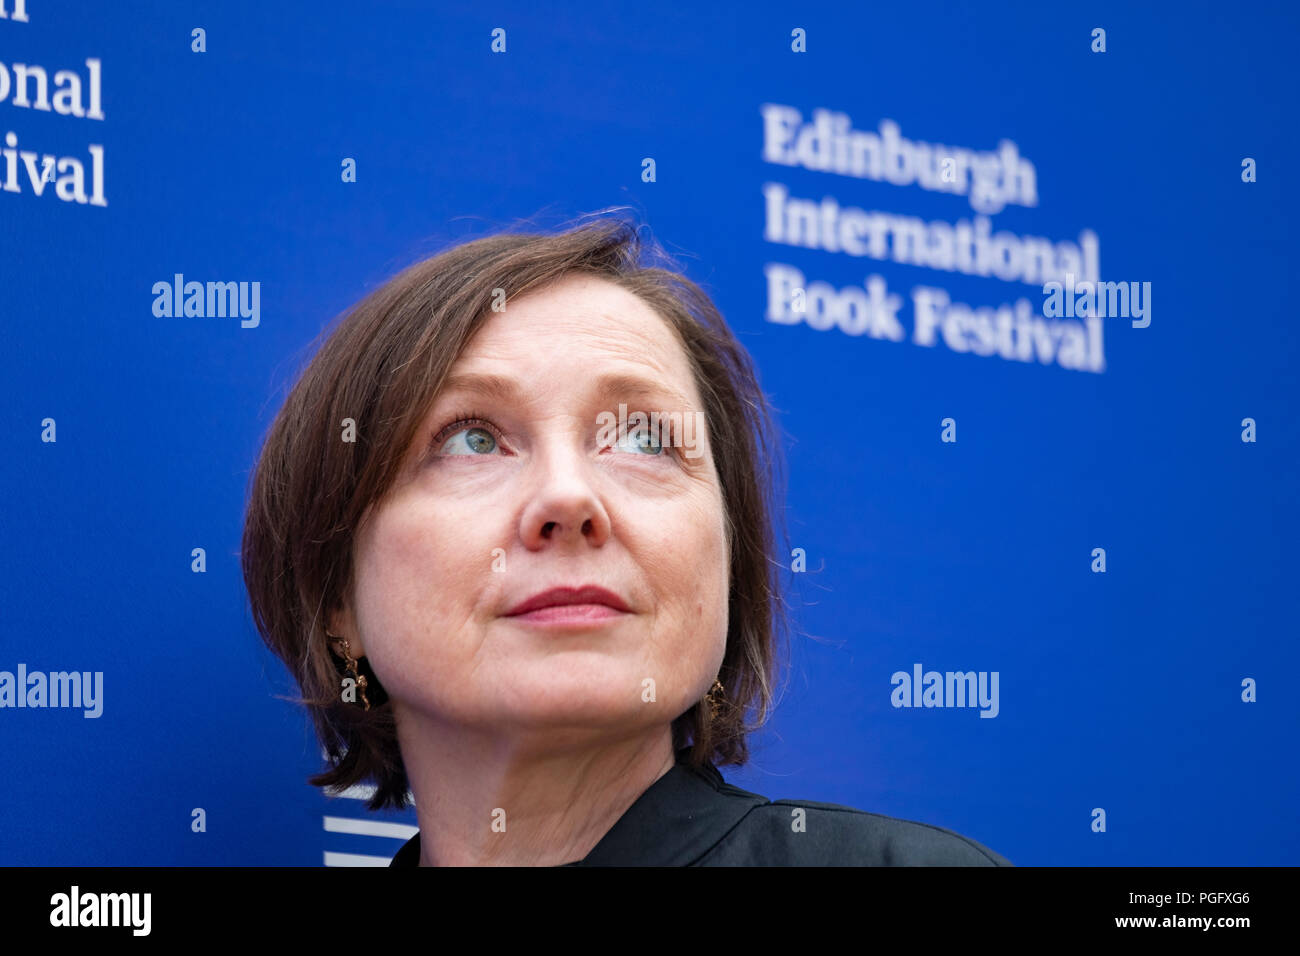 Edinburgh, Scotland, UK. 26 August, 2018. Pictured; Author Lavinia GreenlawÕs book ÒIn the City of LoveÕs SleepÓ is the story of two people who meet in mid-life and tumble helplessly into a love affair beyond their control. Credit: Iain Masterton/Alamy Live News Stock Photo